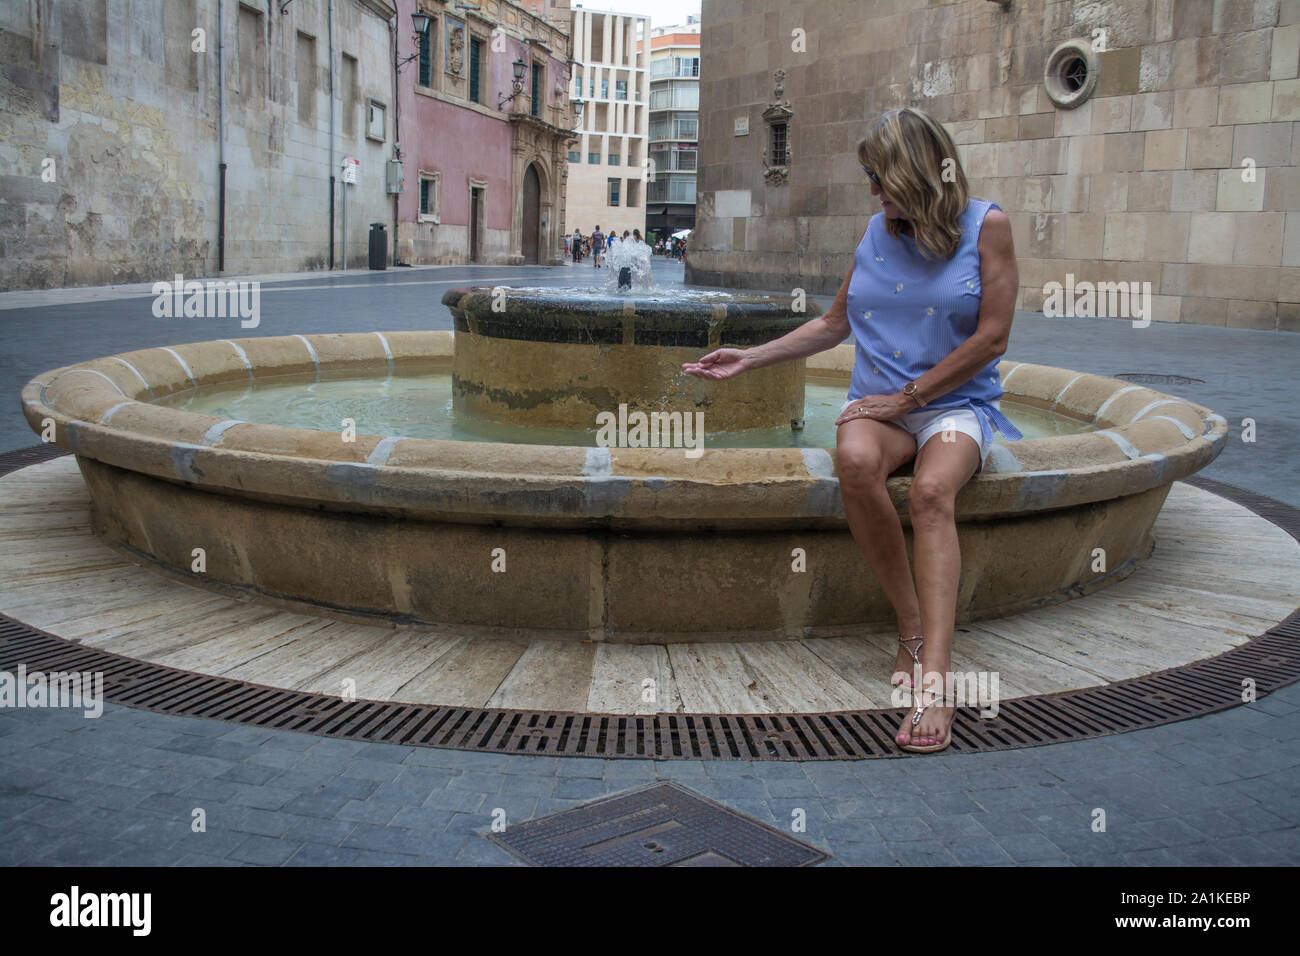 Female tourist dips her hand in a water fountain in the City of Murcia Spain Stock Photo